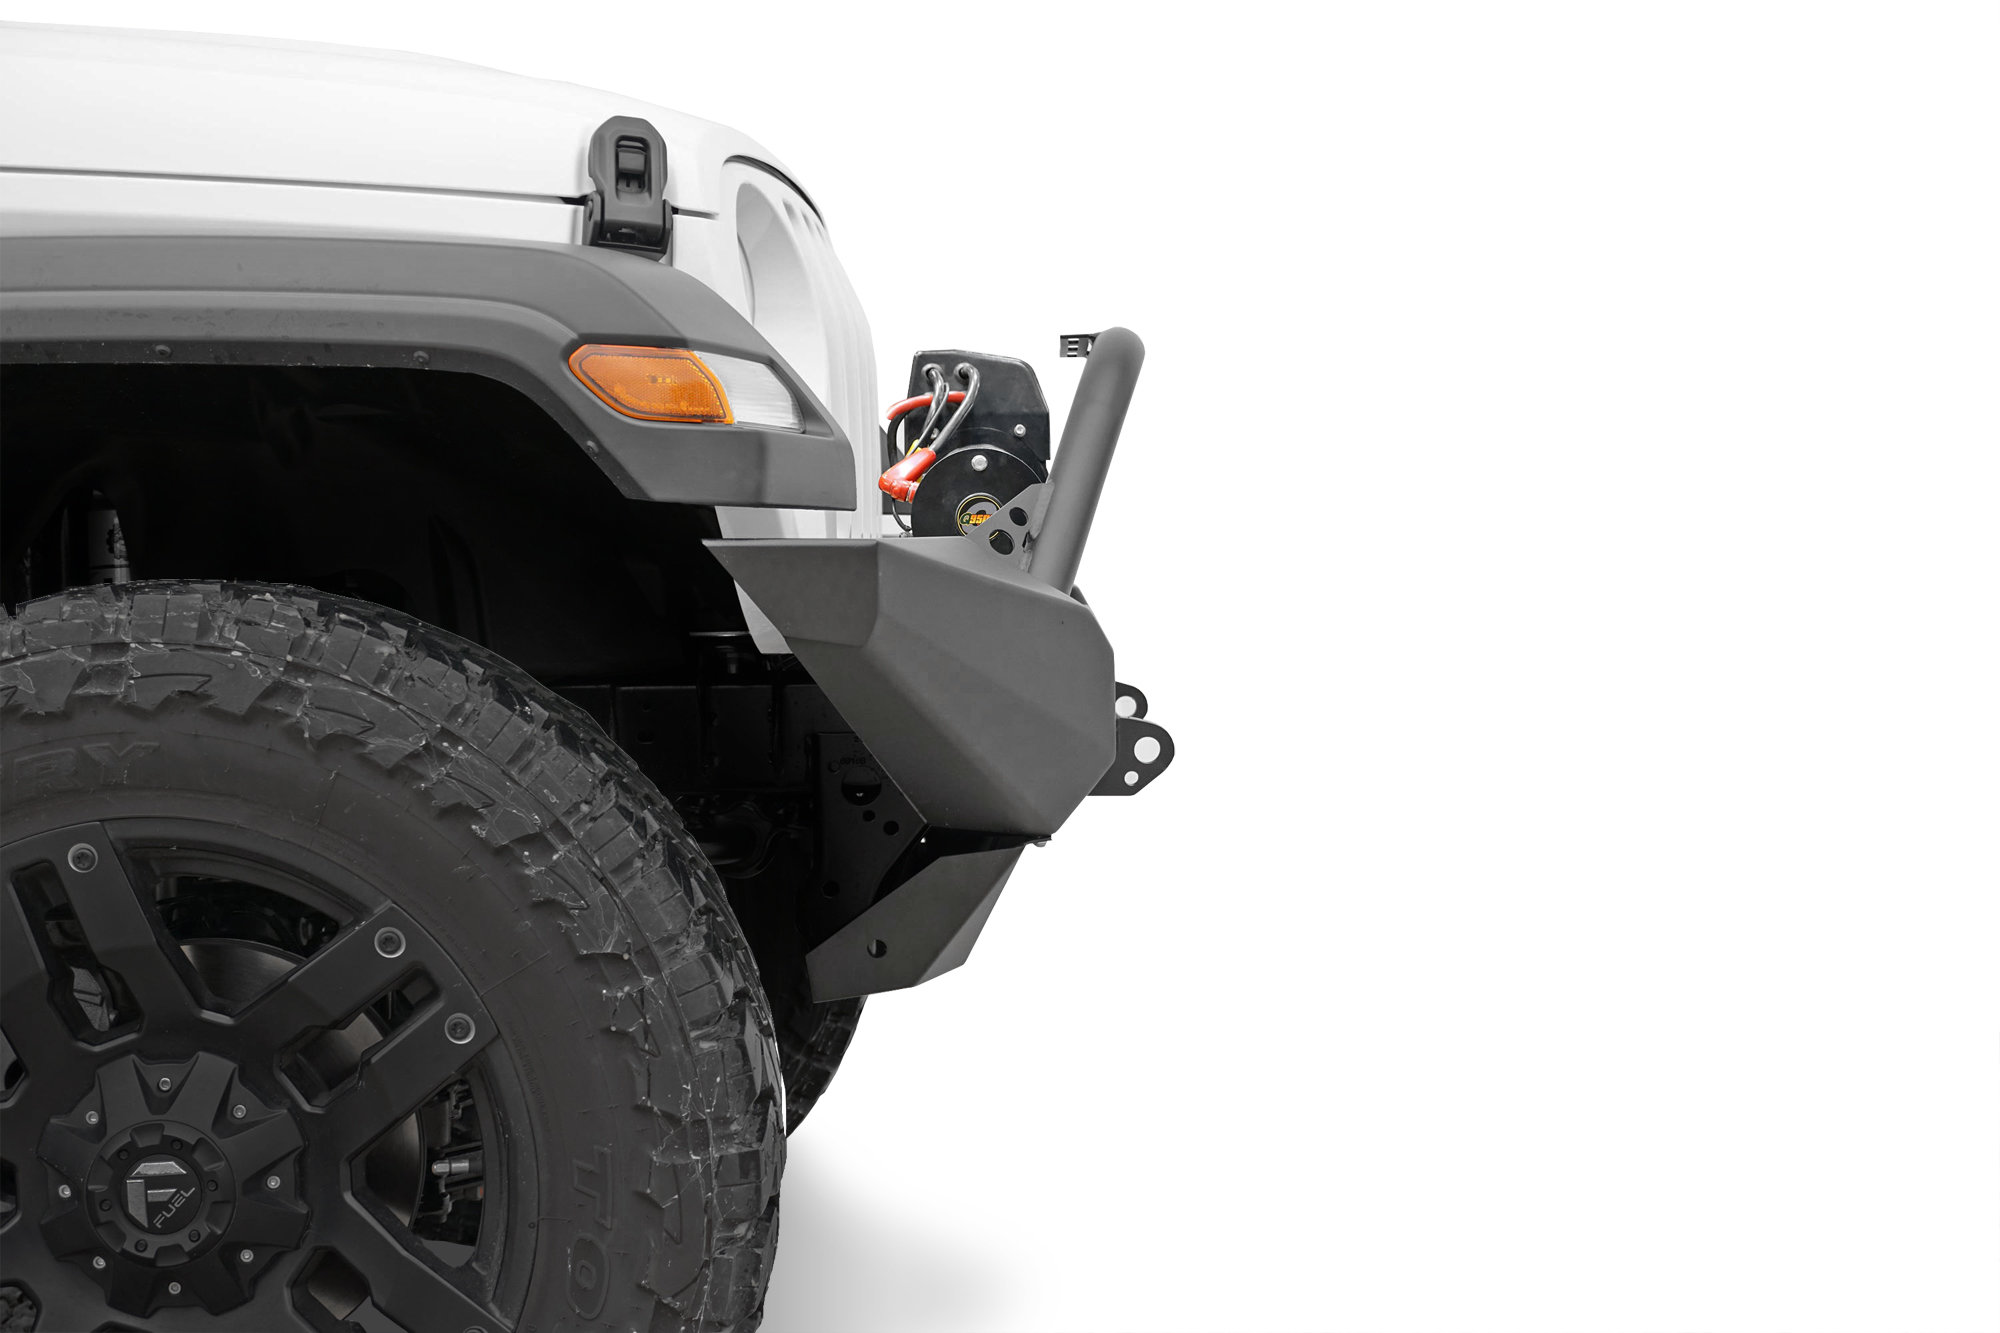 Rough Country 10585 Full Width Front Trail Bumper for 07-22 Jeep Wrangler  JK, JL & Gladiator JT